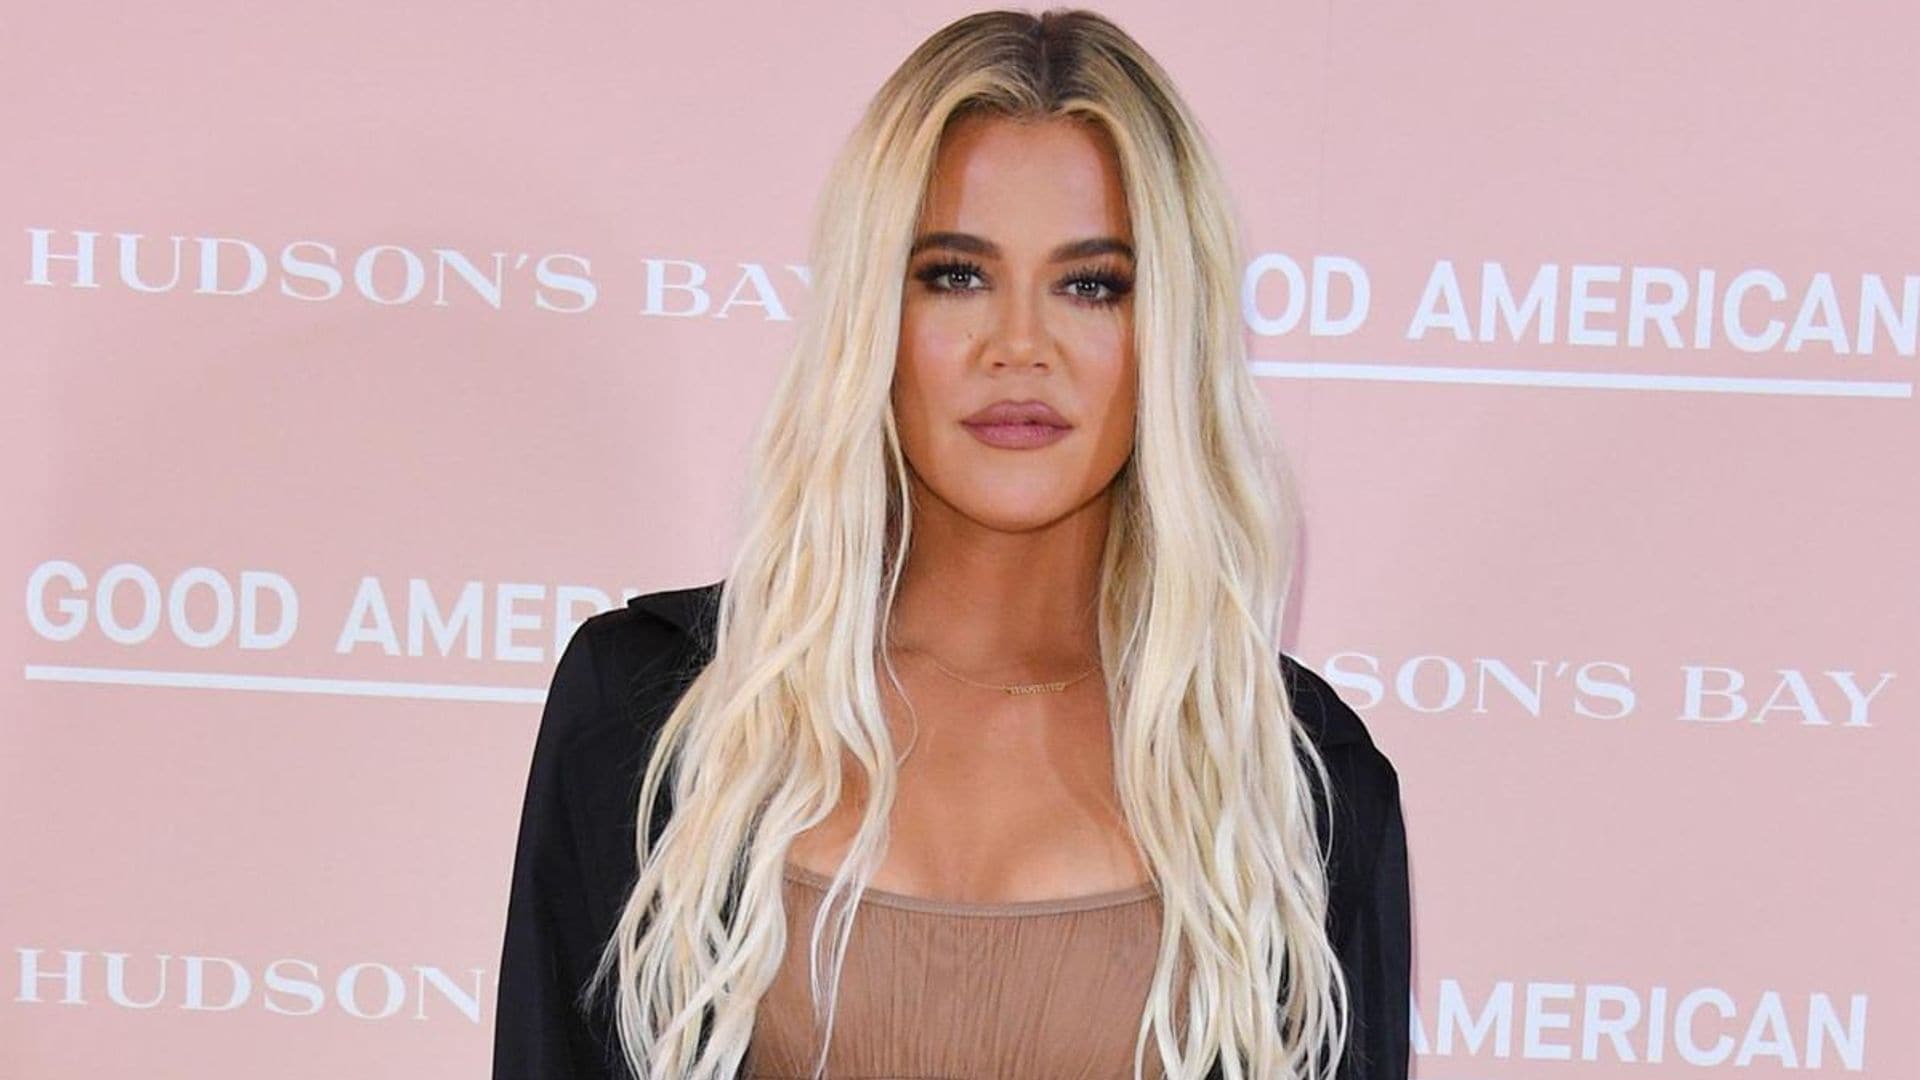 Hudson's Bay Celebrates Launch Of Good American With Co-Founders Khloe Kardashian And Emma Grede In Toronto